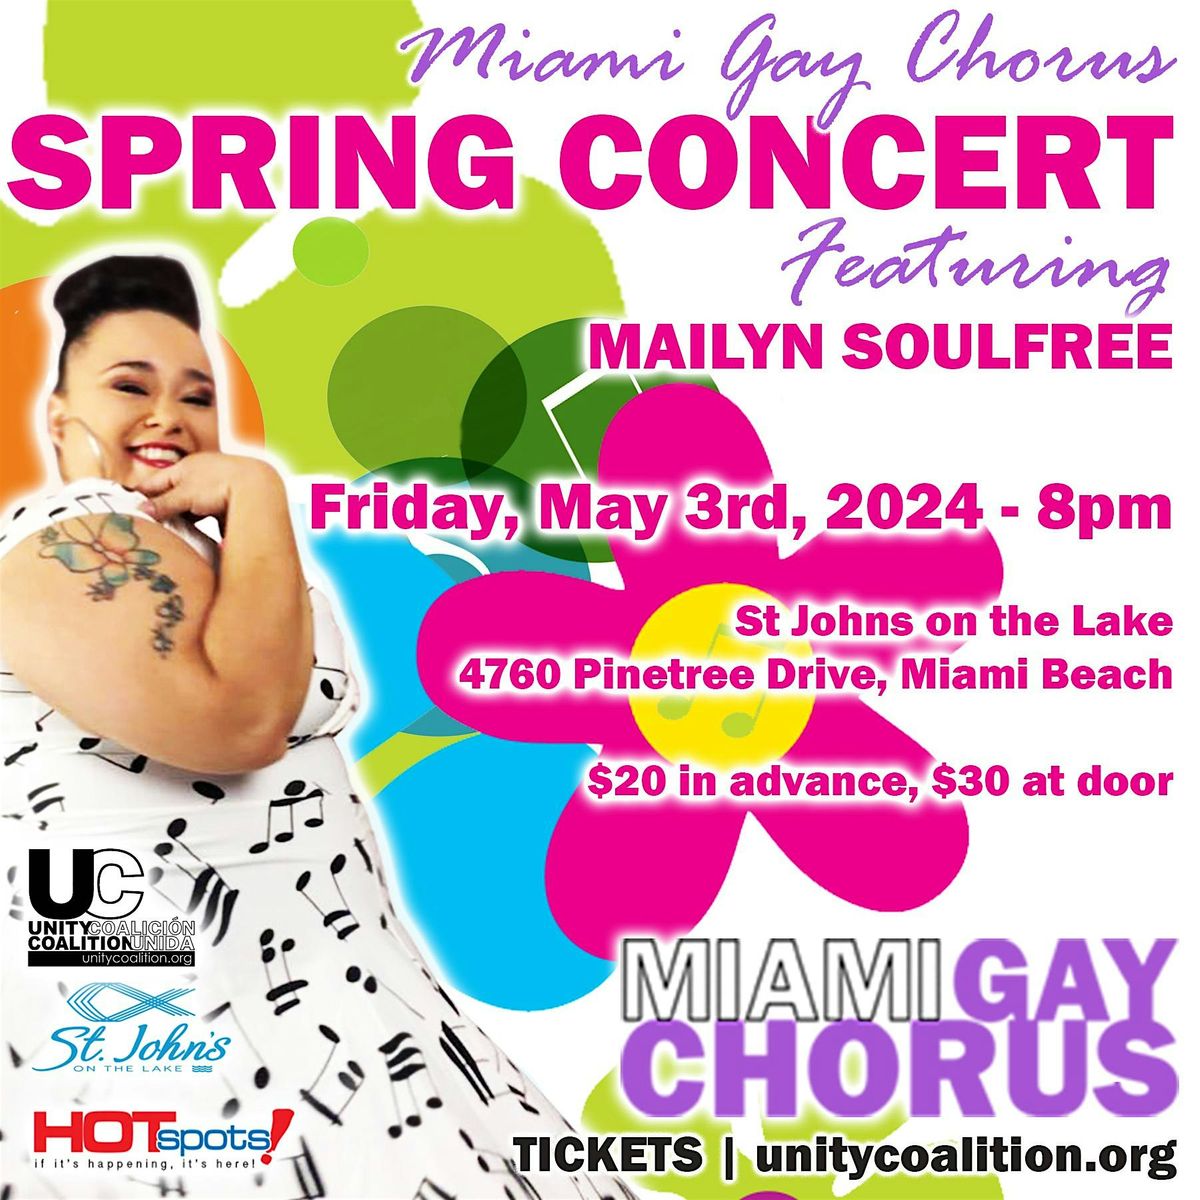 MIAMI GAY CHORUS Spring Concert with MAILYN SOULFREE